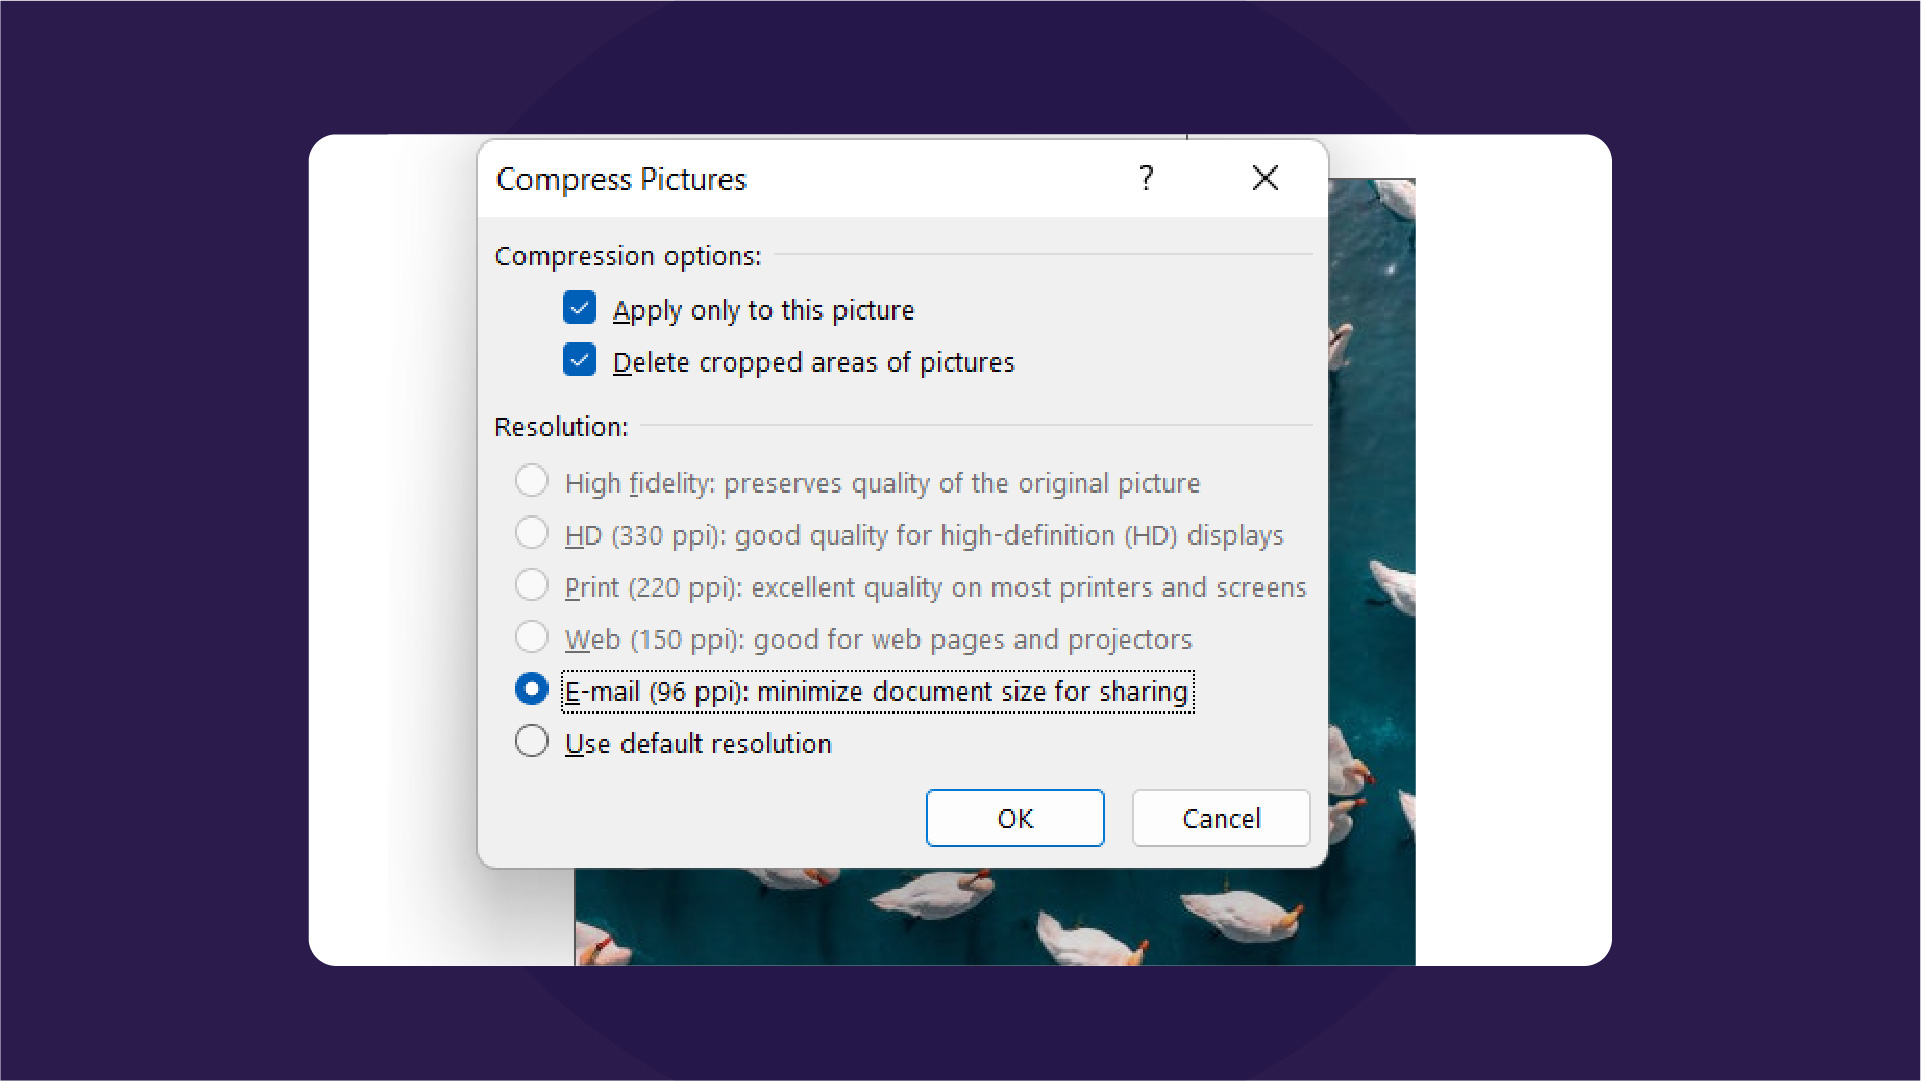 Compressing images in PPT